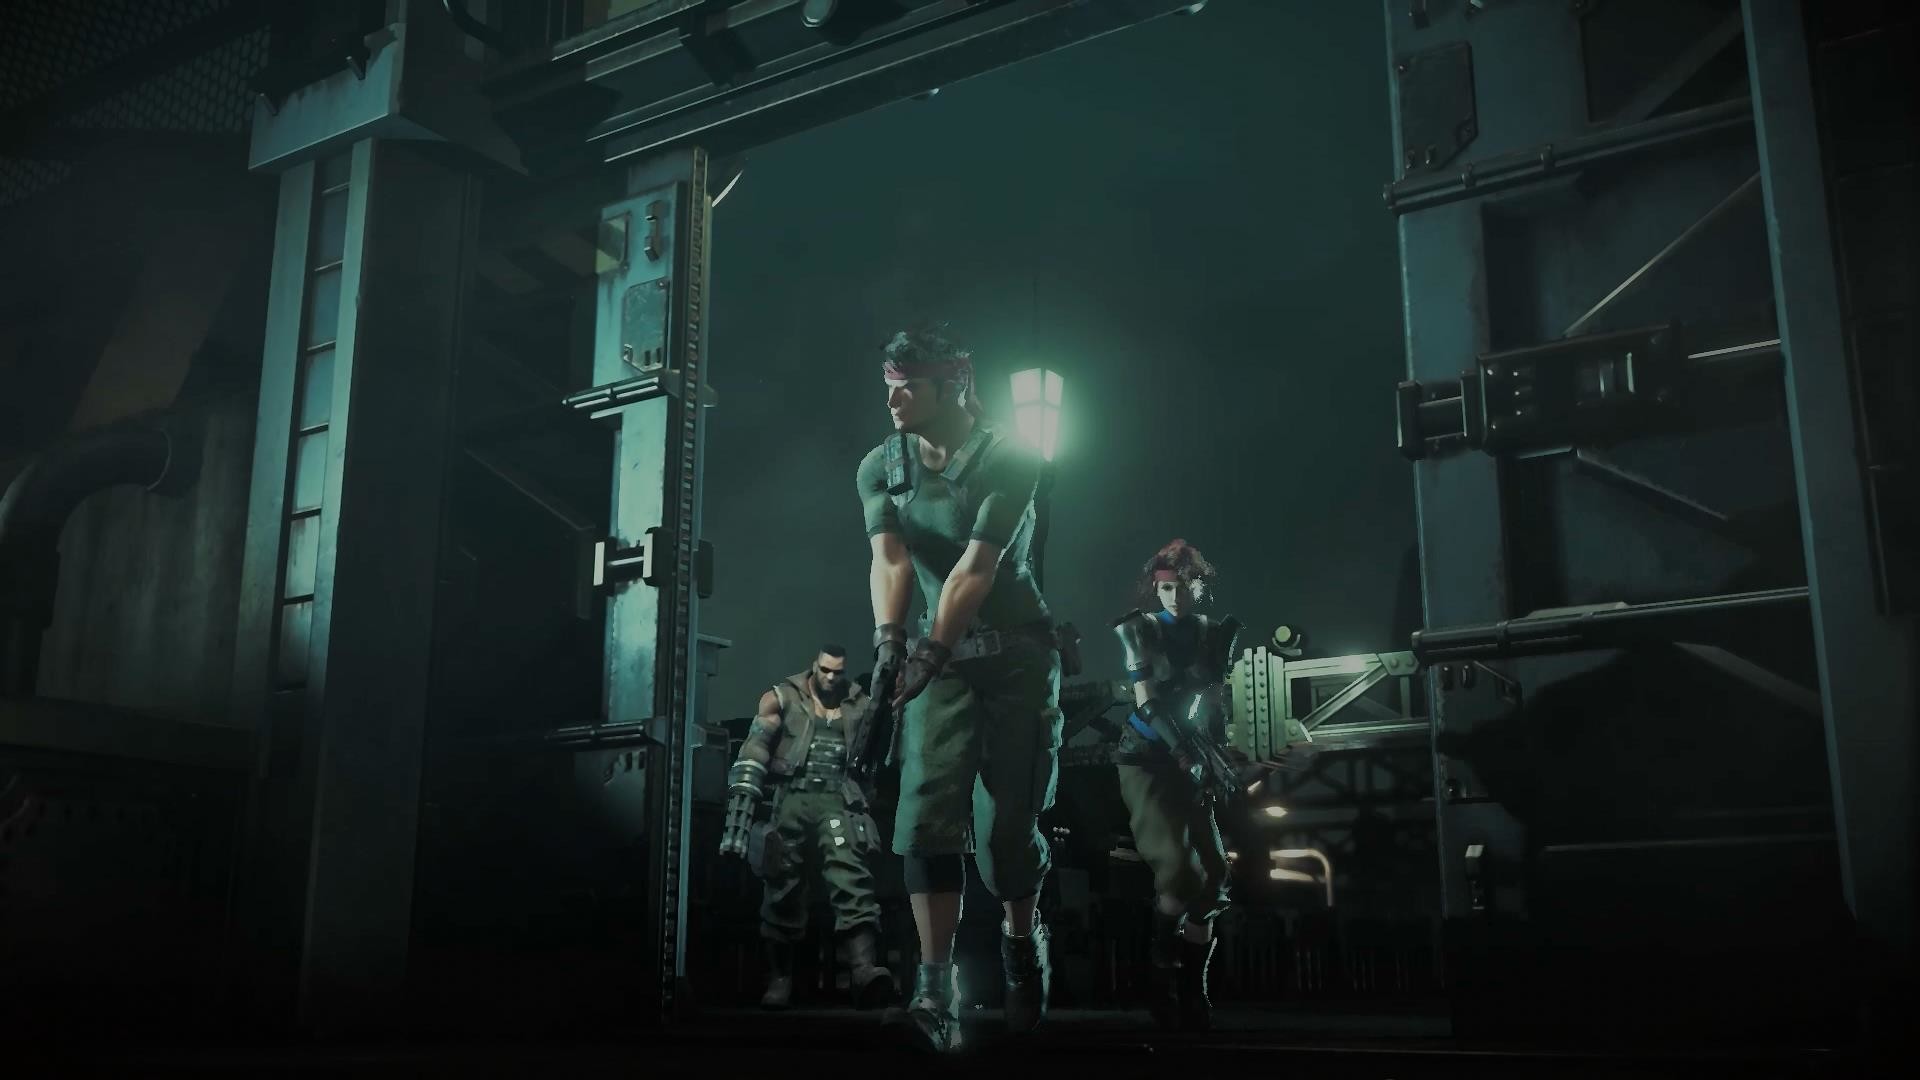 1920x1080 Final Fantasy VII Remake will explore characters like Biggs, Wedge and  Jessie further - Nova Crystallis